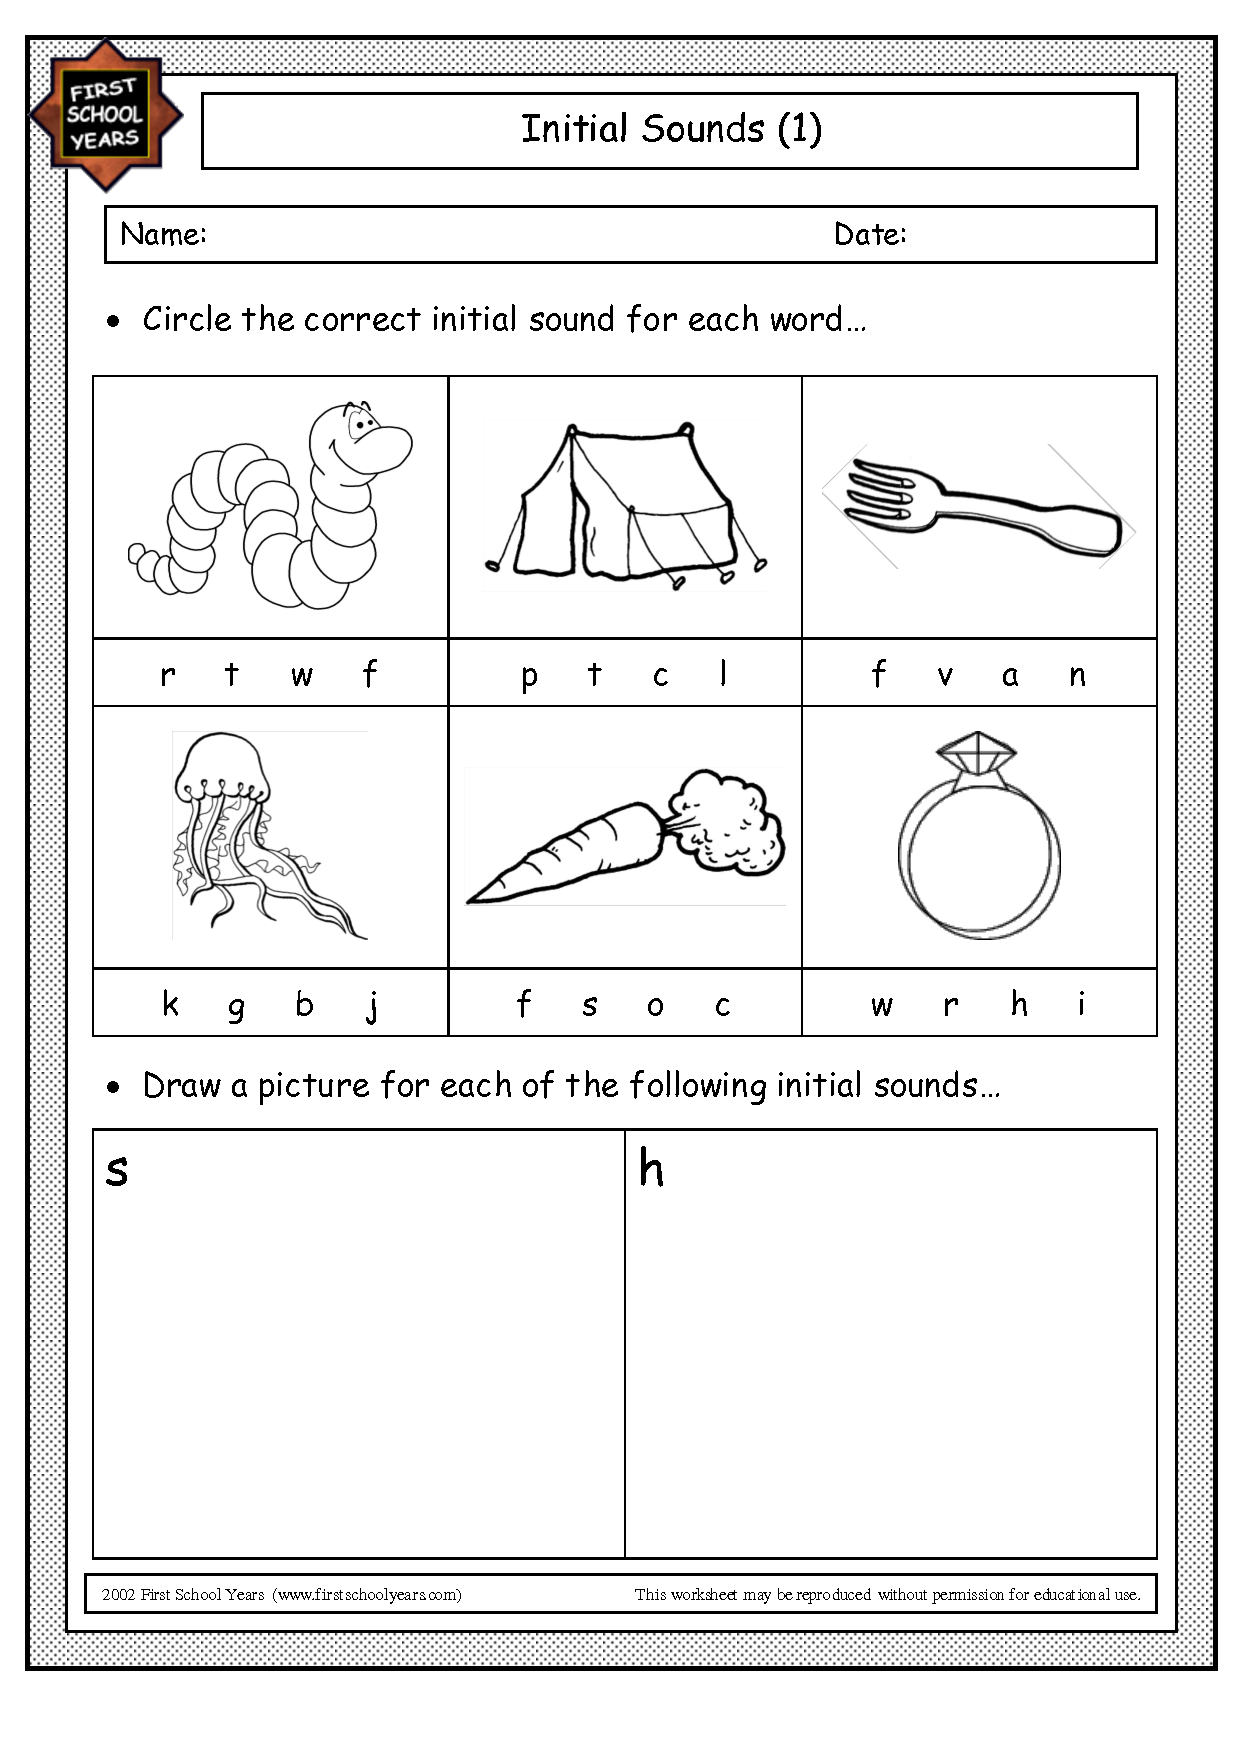 15-best-images-of-ch-phonics-worksheets-free-sh-ch-th-digraph